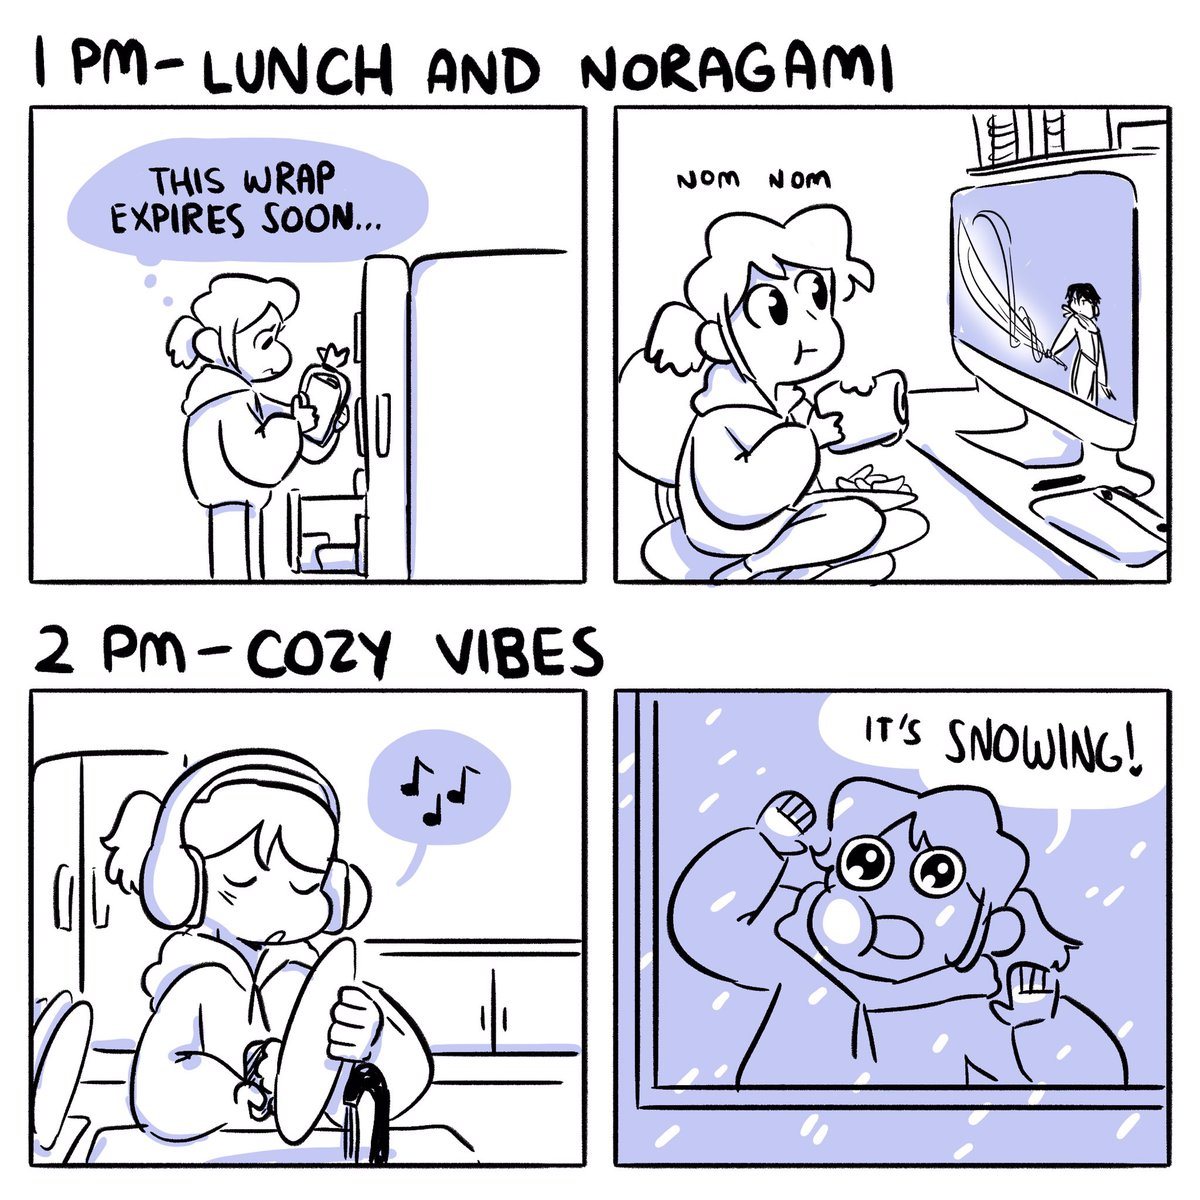 Happy Hourly Comic day! (1/2) #hourlycomicday2021 